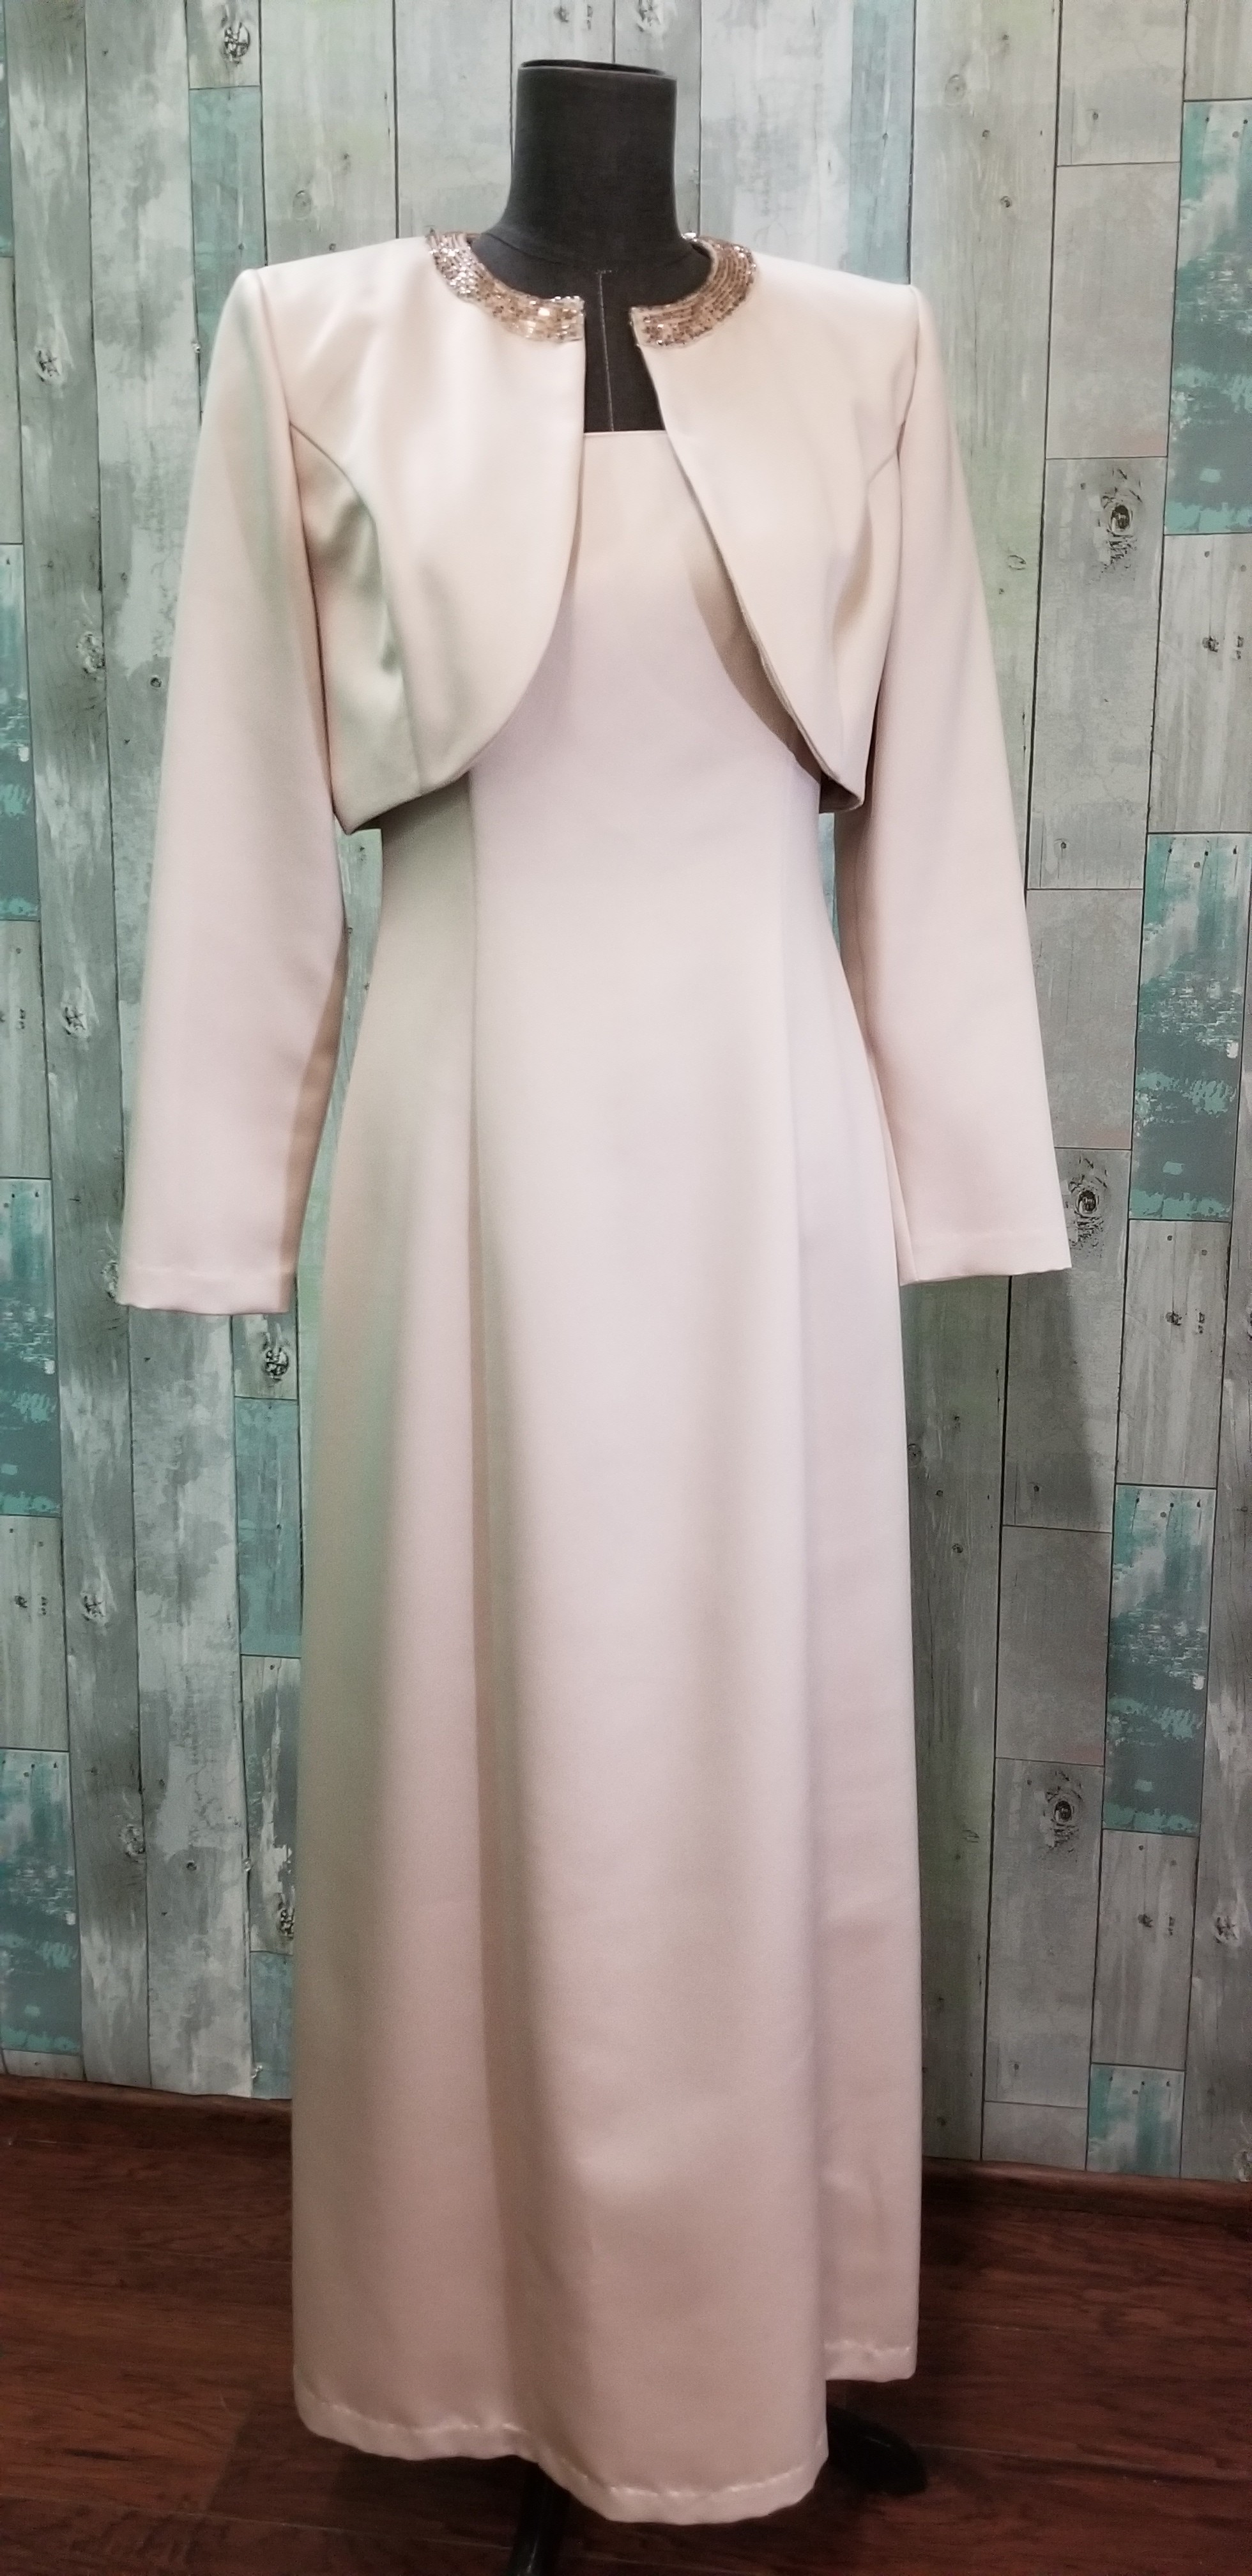 Alex Nights 2 piece long formal. The cropped bolero jacket has beautiful beading arount the neckline. The dress is spaghetti strap with a back zip closure.
Freshly dry cleaned 100% polyester
NO RETURNS; we strongly suggest you stop in and try it on if you're unsure of your size.
Champagne
Size: 8